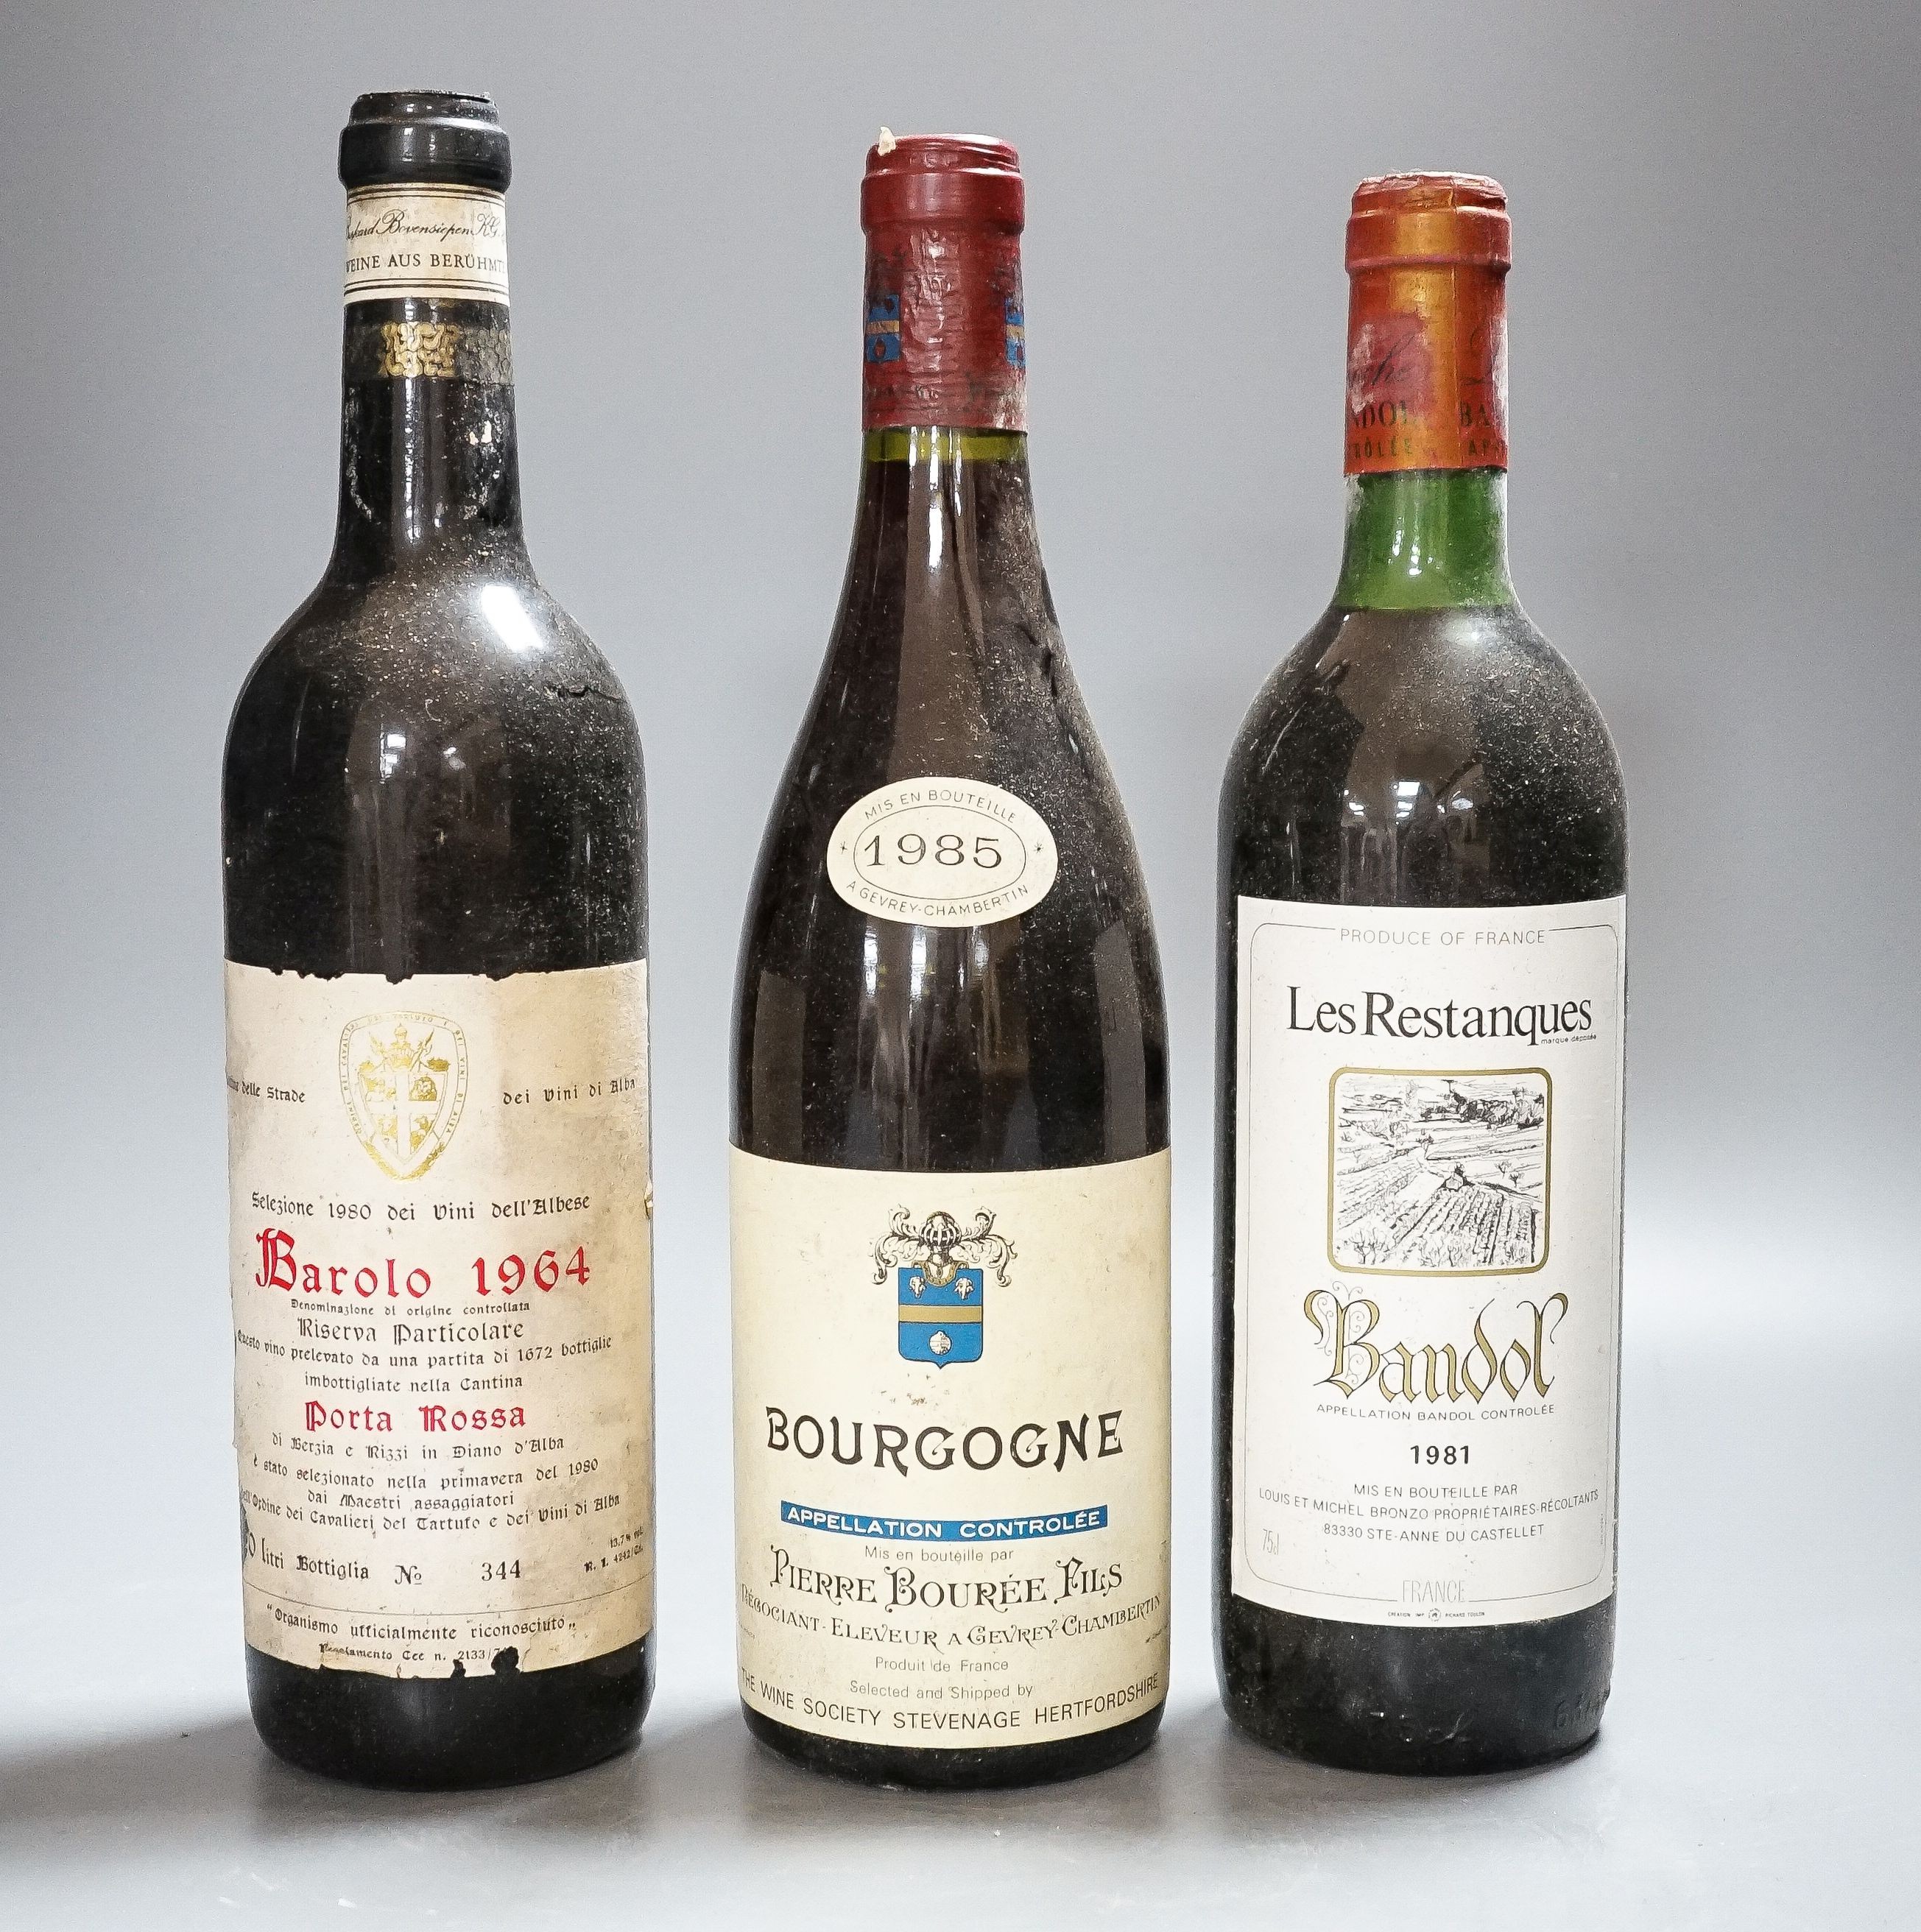 A collection of 24 bottles of red wines including 9 bottles of 1985 Bourgogne, 2 bottles of 1964 Barolo, 4 bottles 1986 Crozes Hermitage